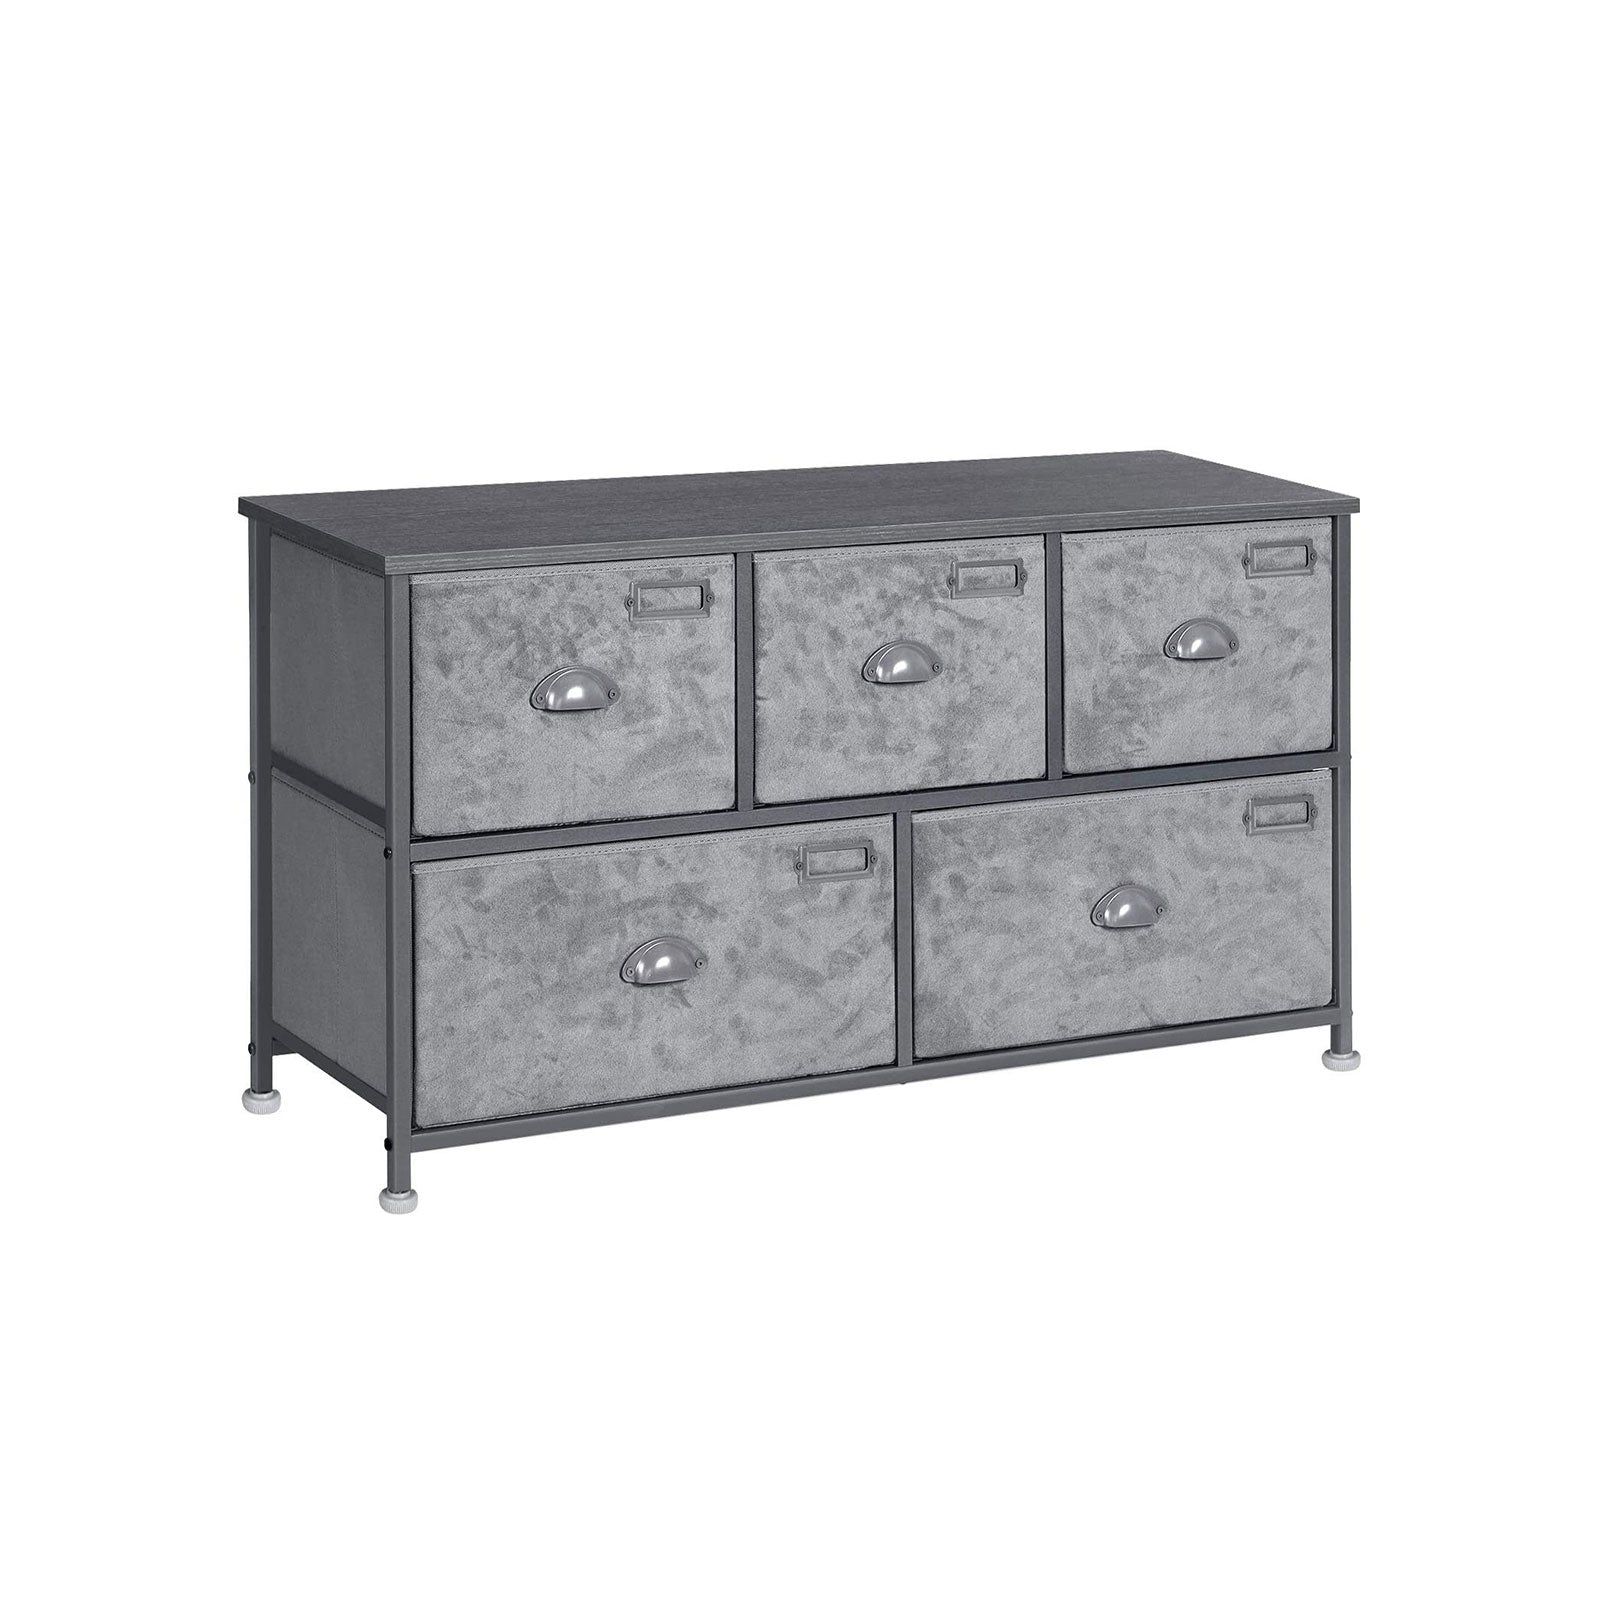 SONGMICS Wide Storage Dresser with 5 Drawers